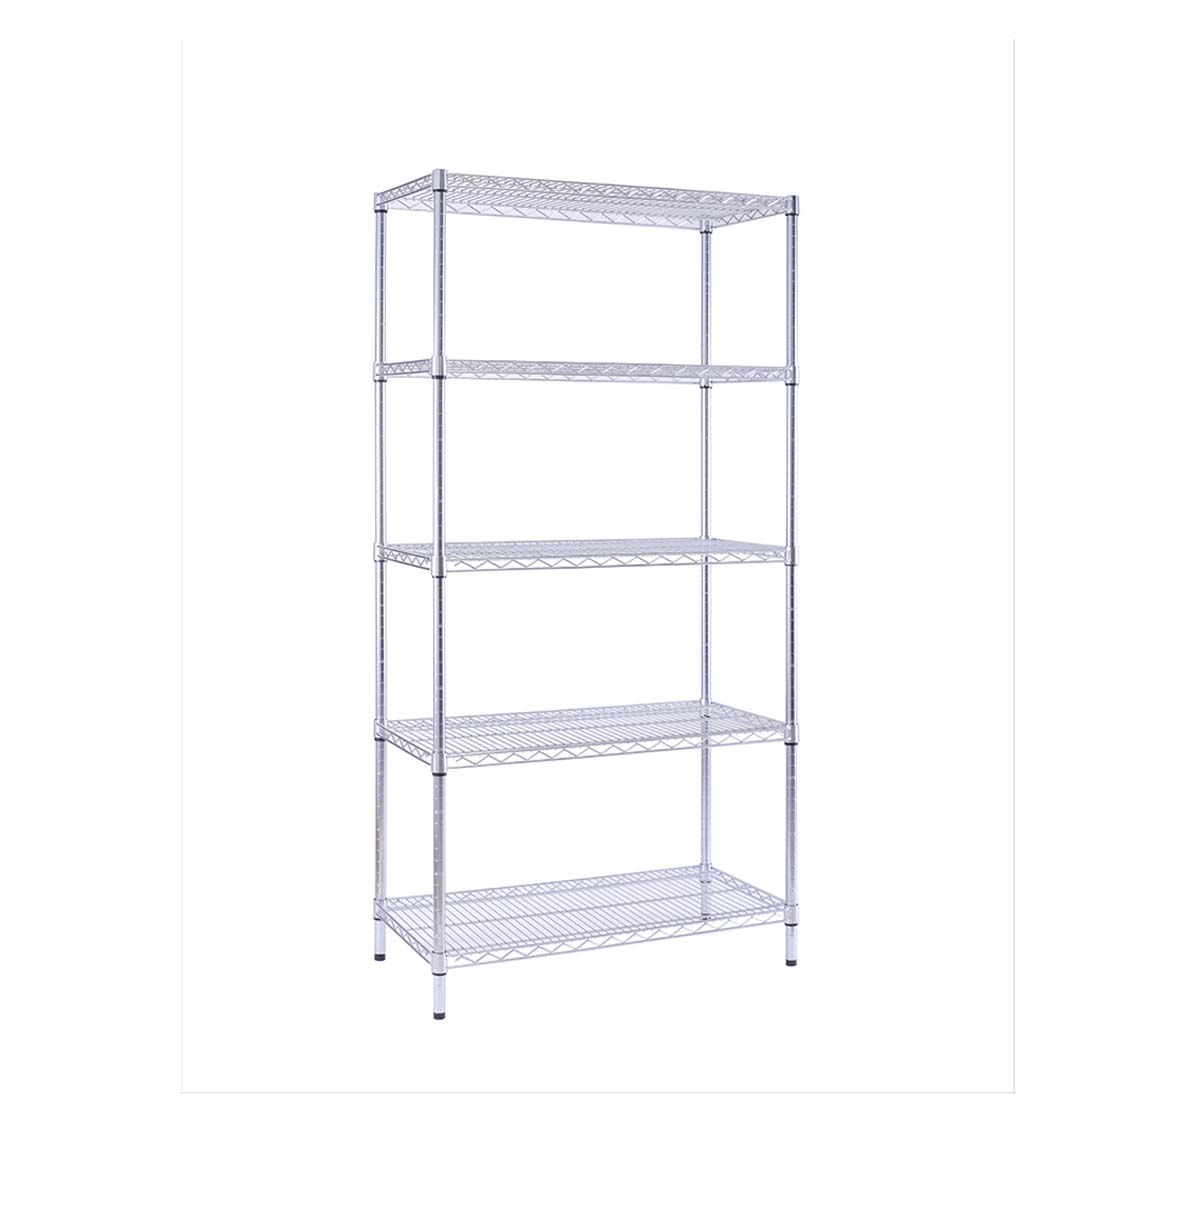  5-Tier Wire Shelving Unit for Industiral / Metal Steel Wire Rack 